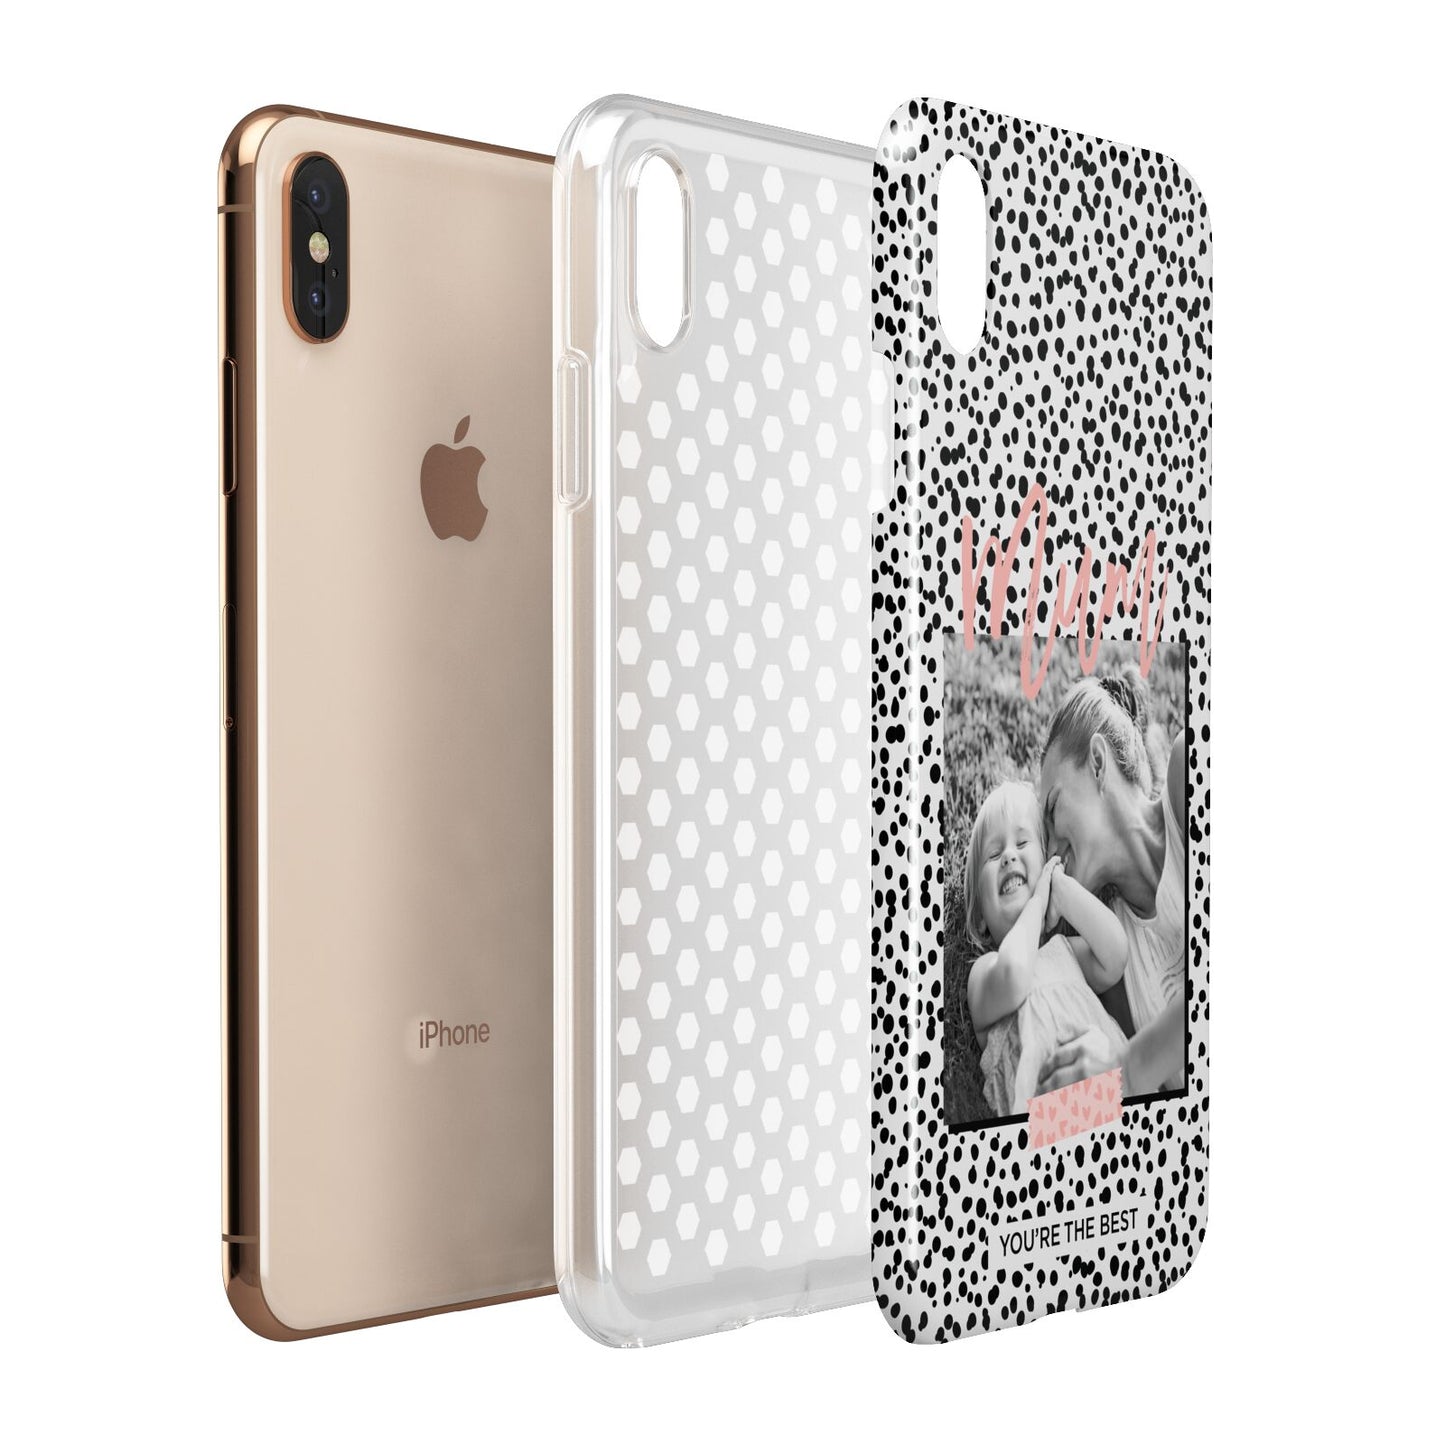 Polka Dot Mum Apple iPhone Xs Max 3D Tough Case Expanded View